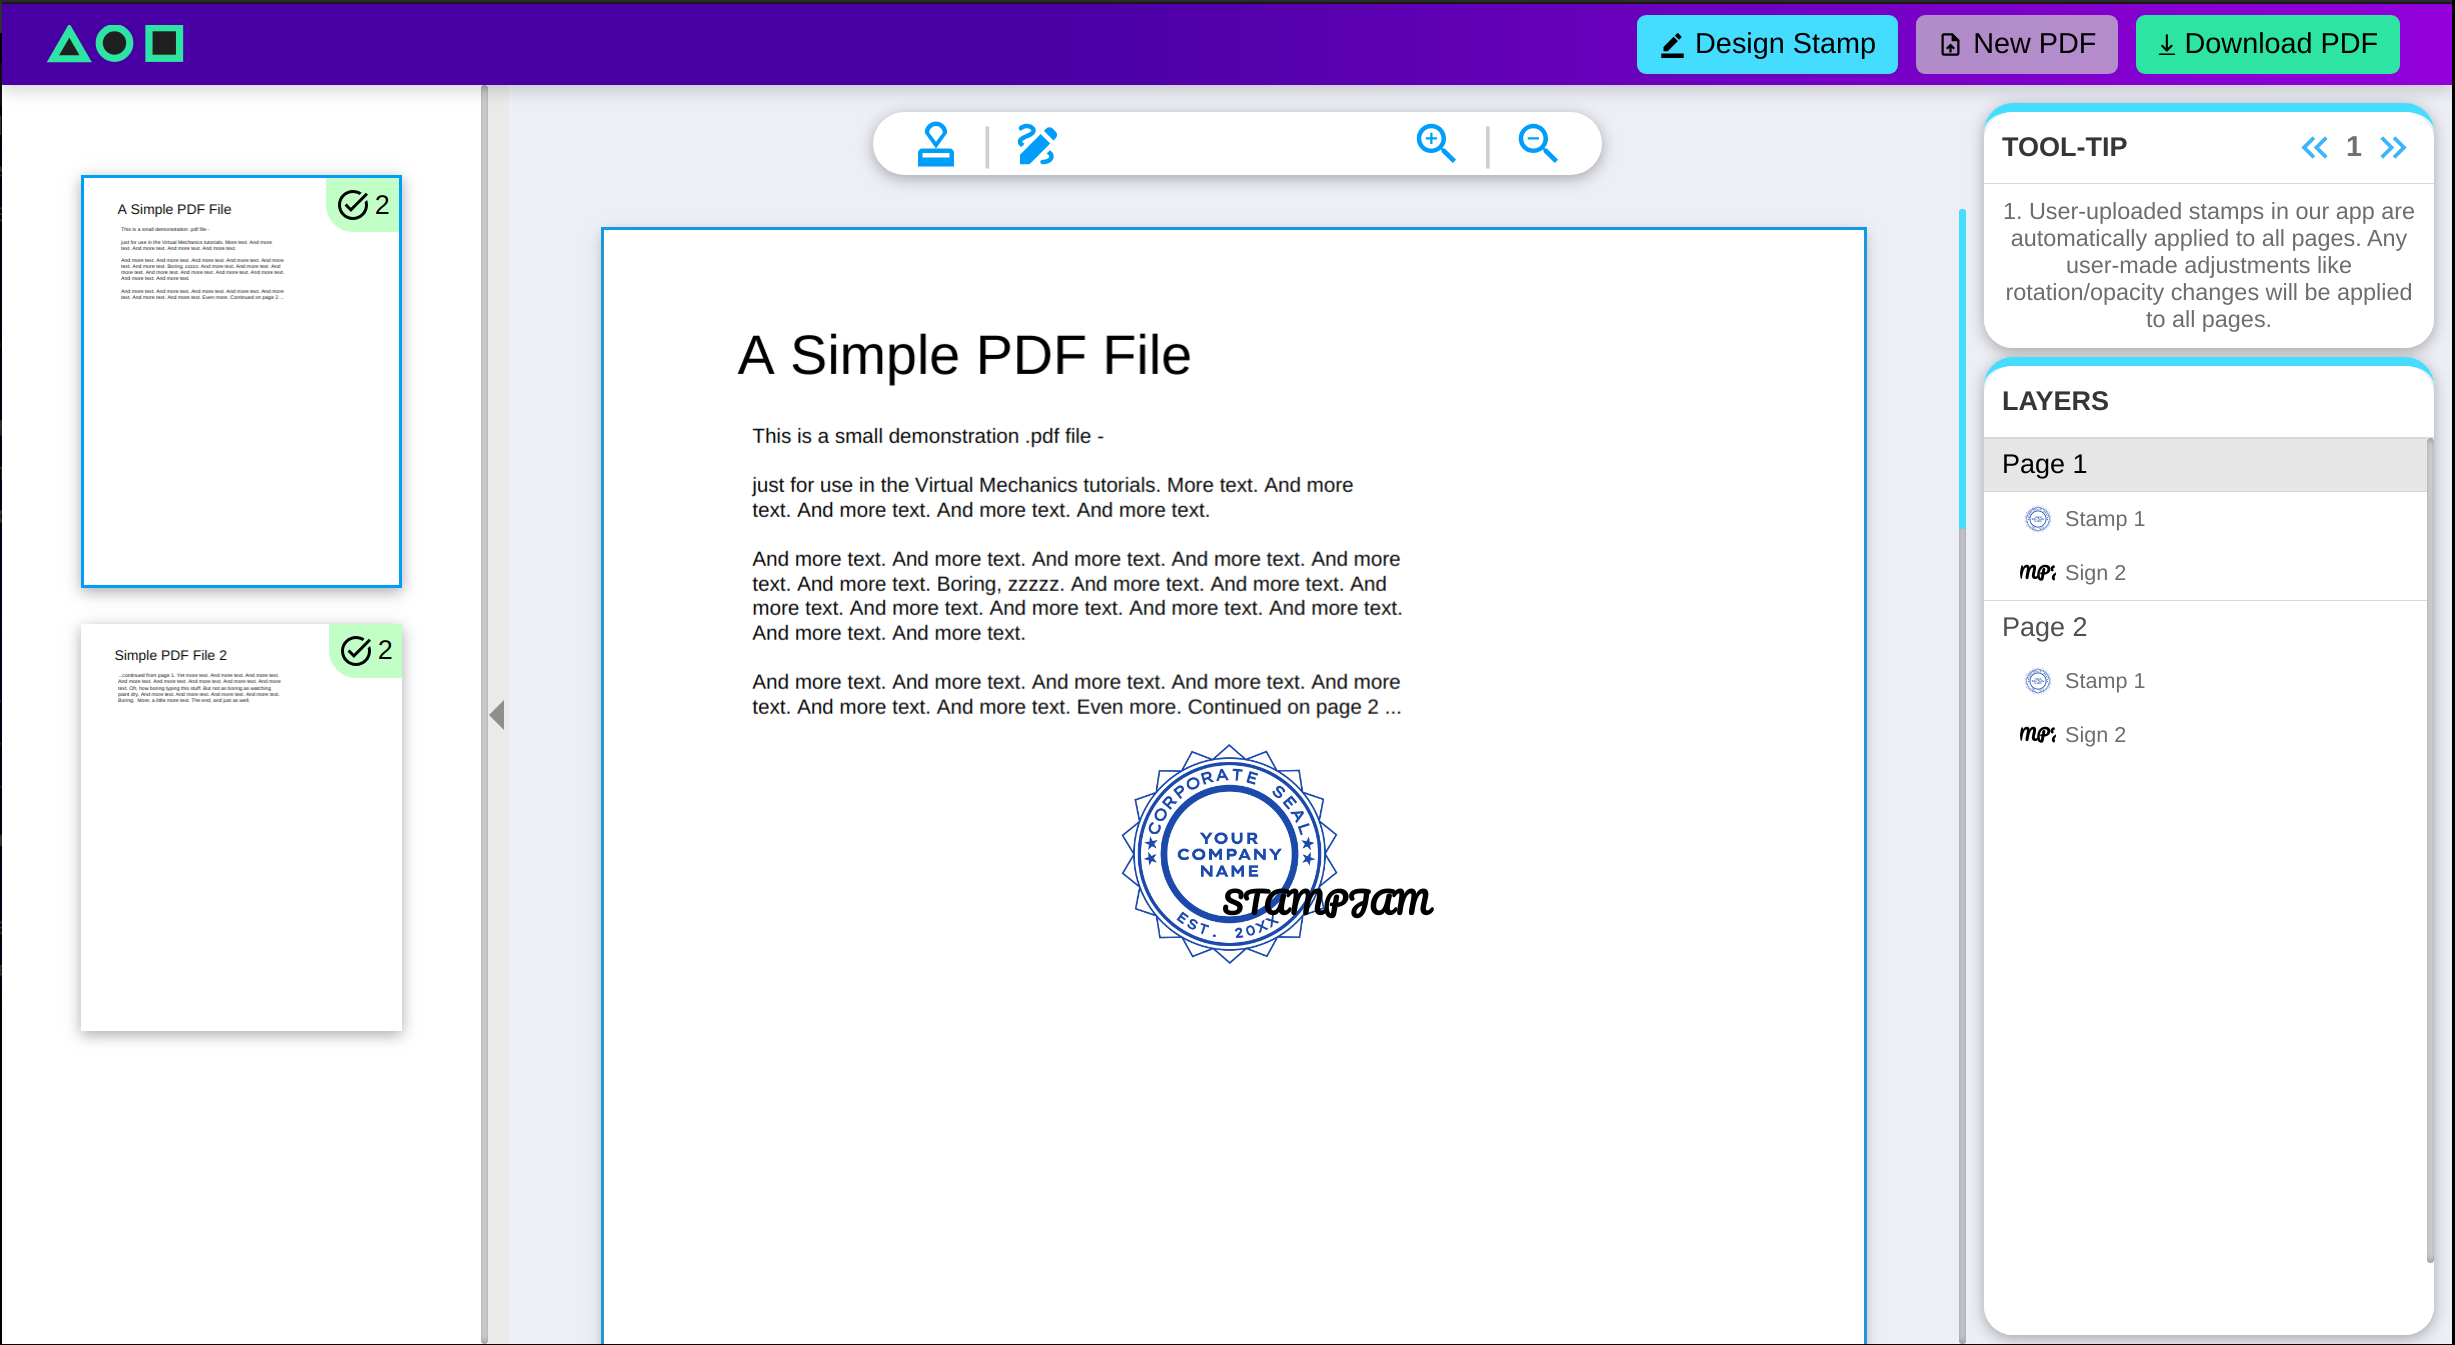 Download your signed and stamped PDF instantly and share. No more printing, stamping/signing, scanning and sharing. Welcome to the future of efficient document management.